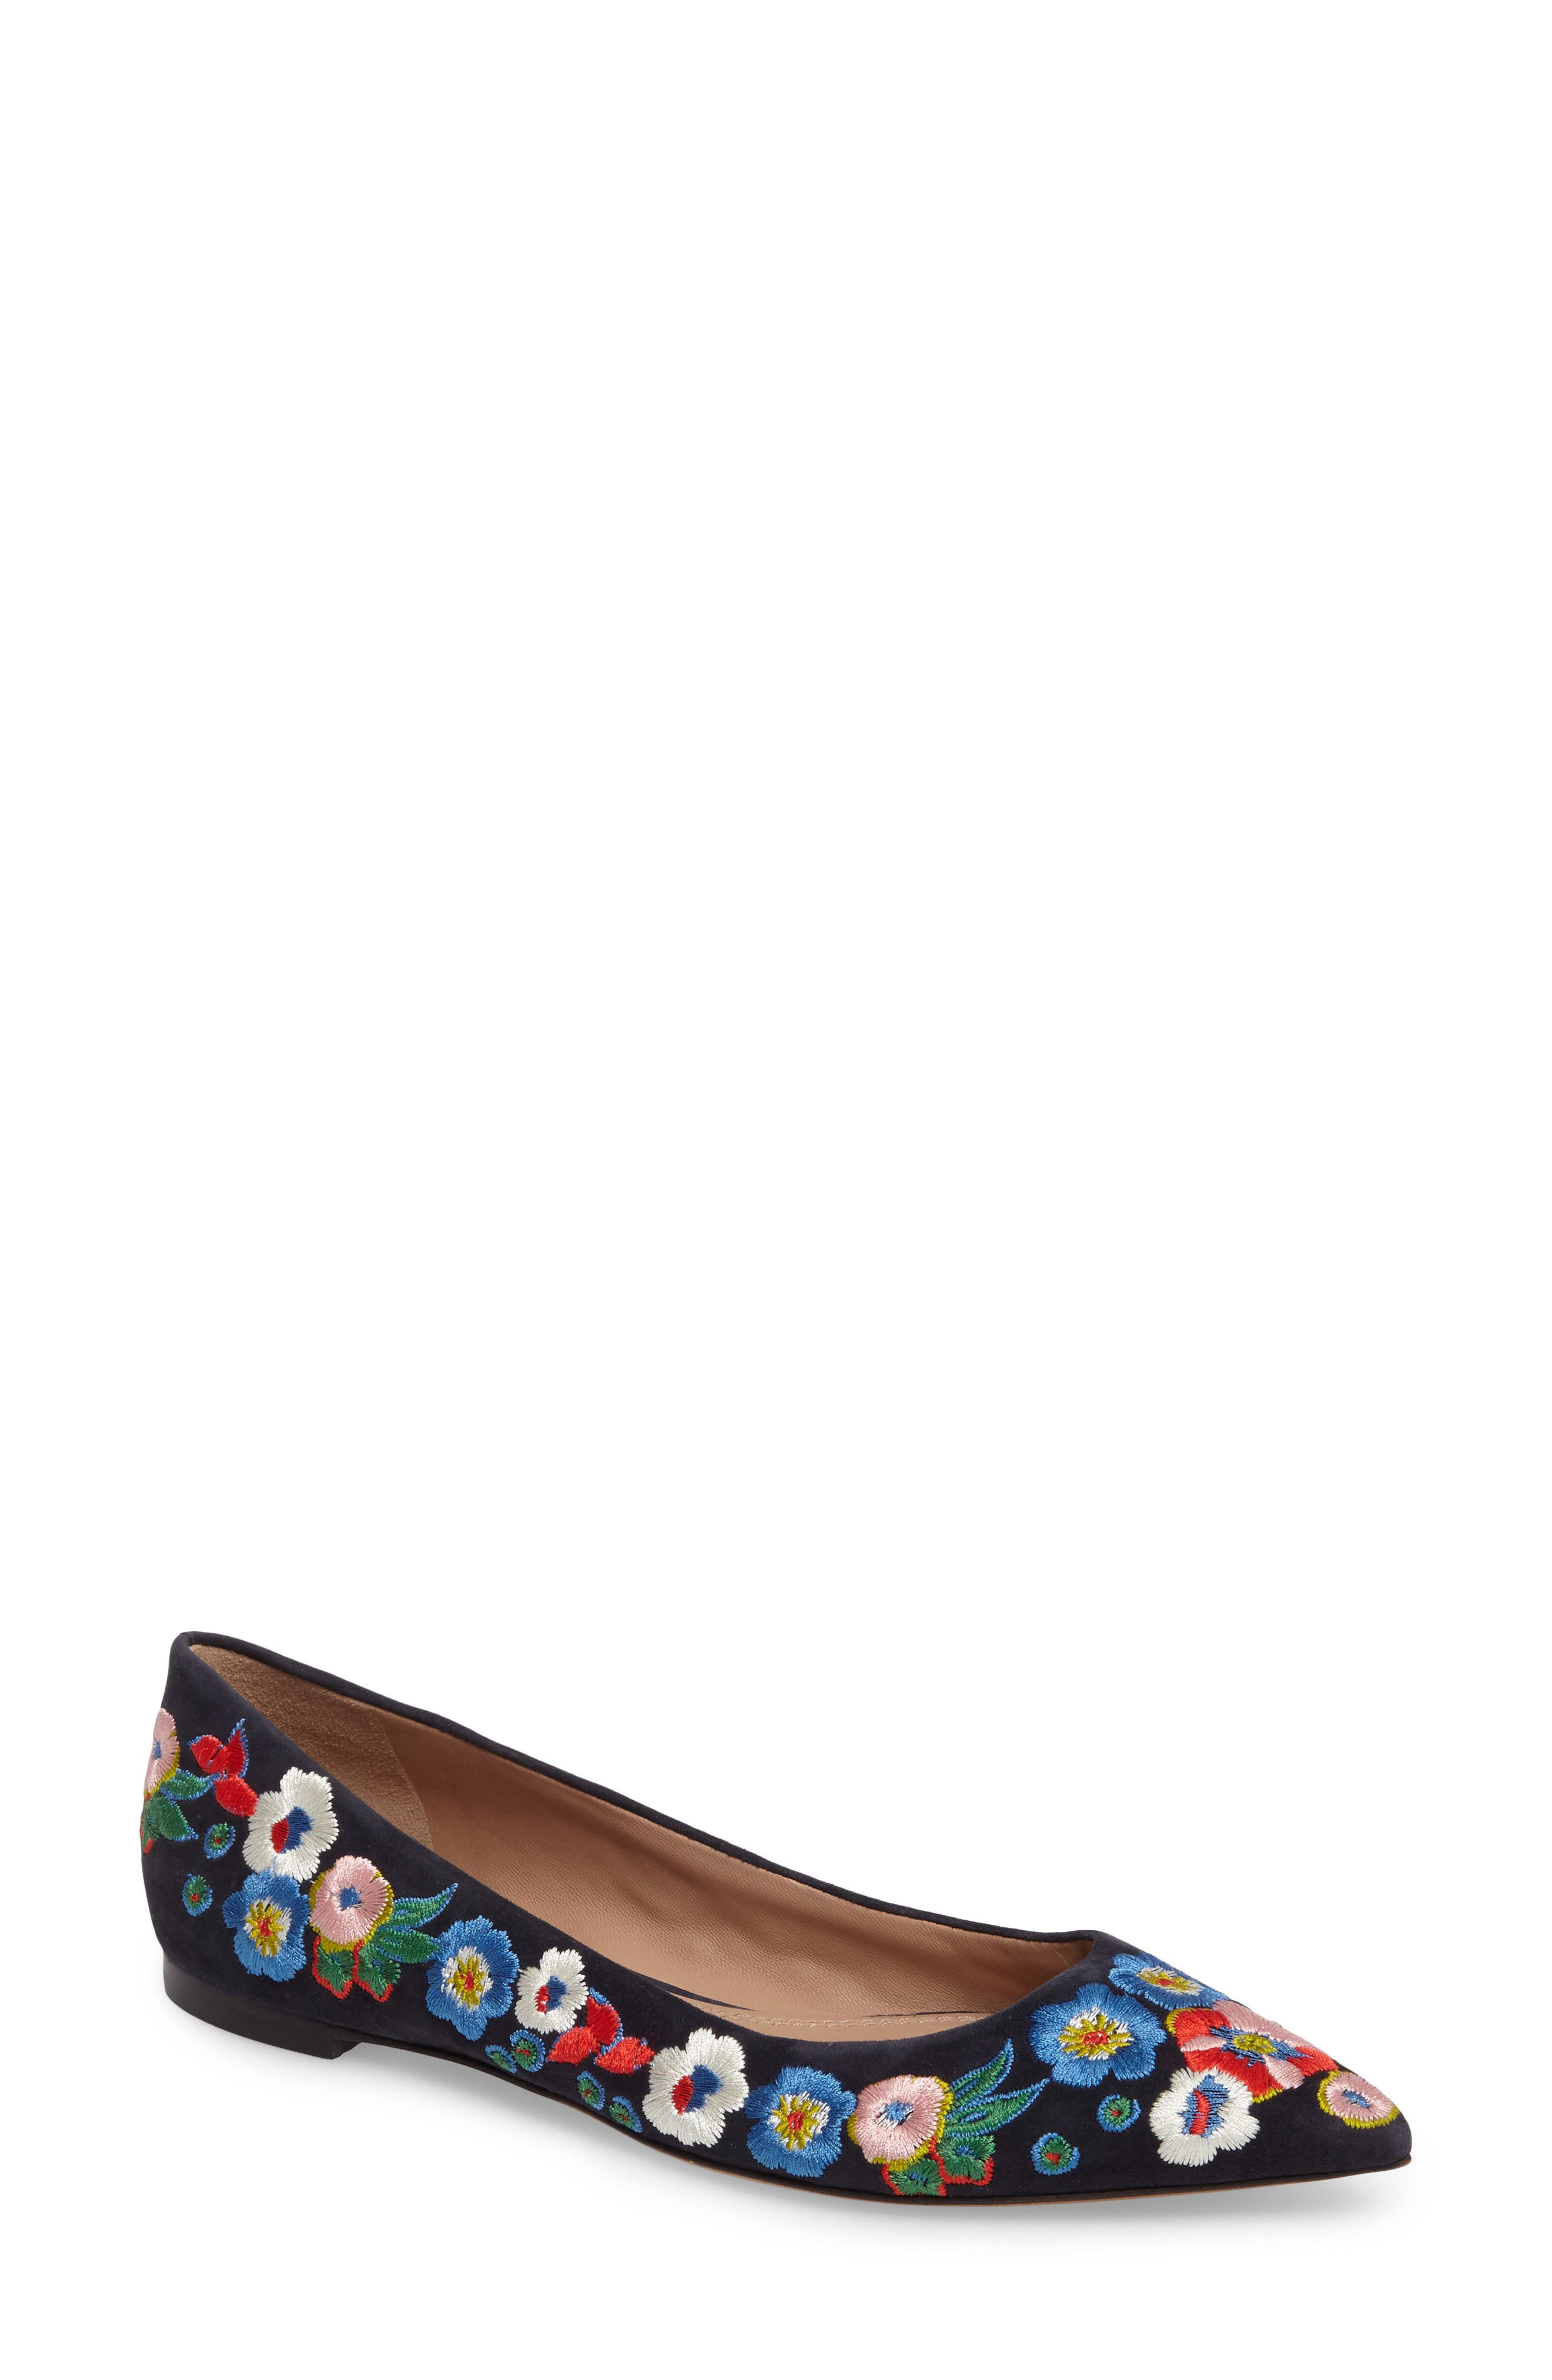 tory burch embroidered shoes